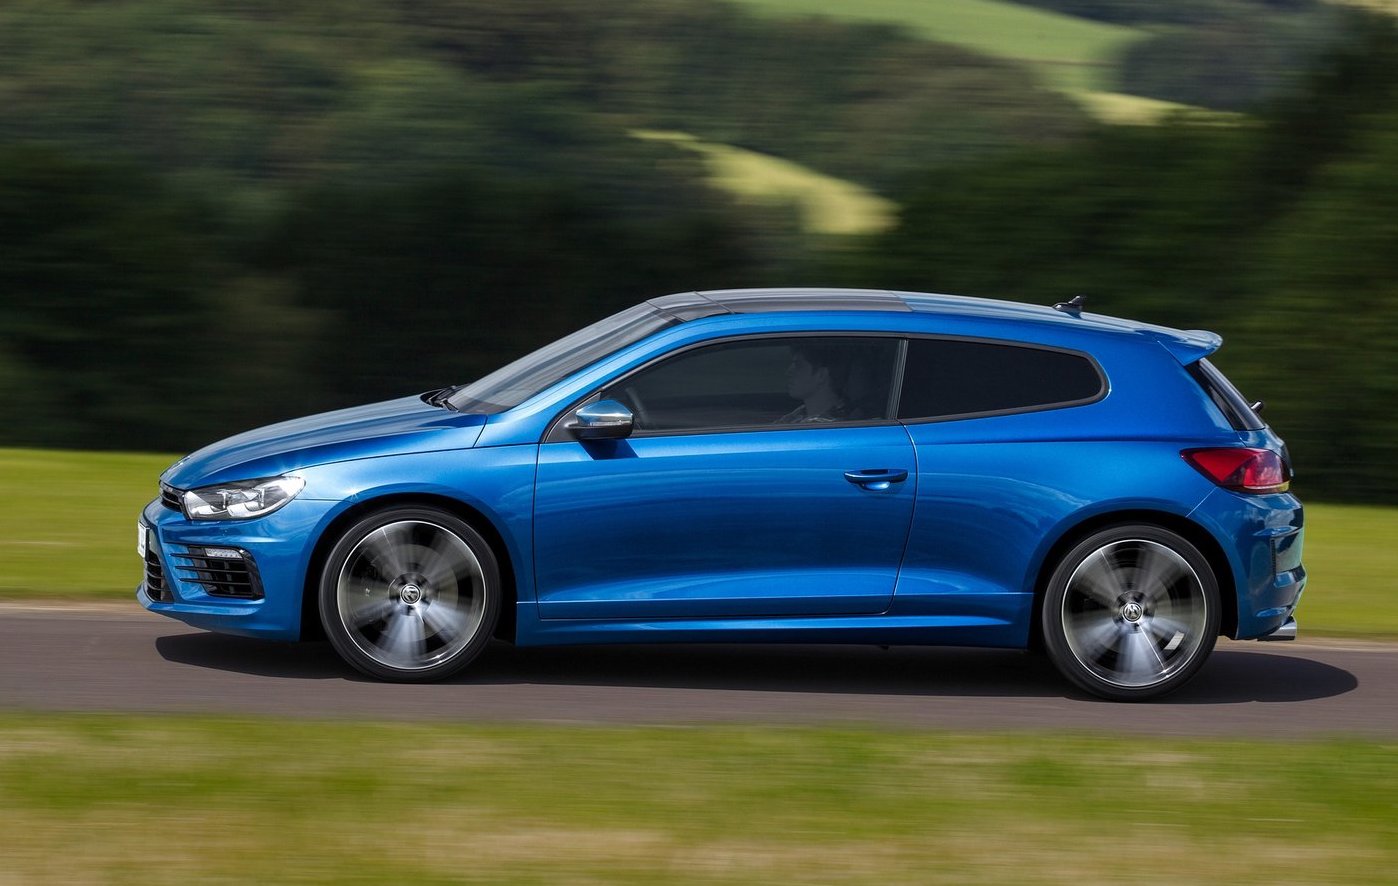 Volkswagen Scirocco production comes to an end